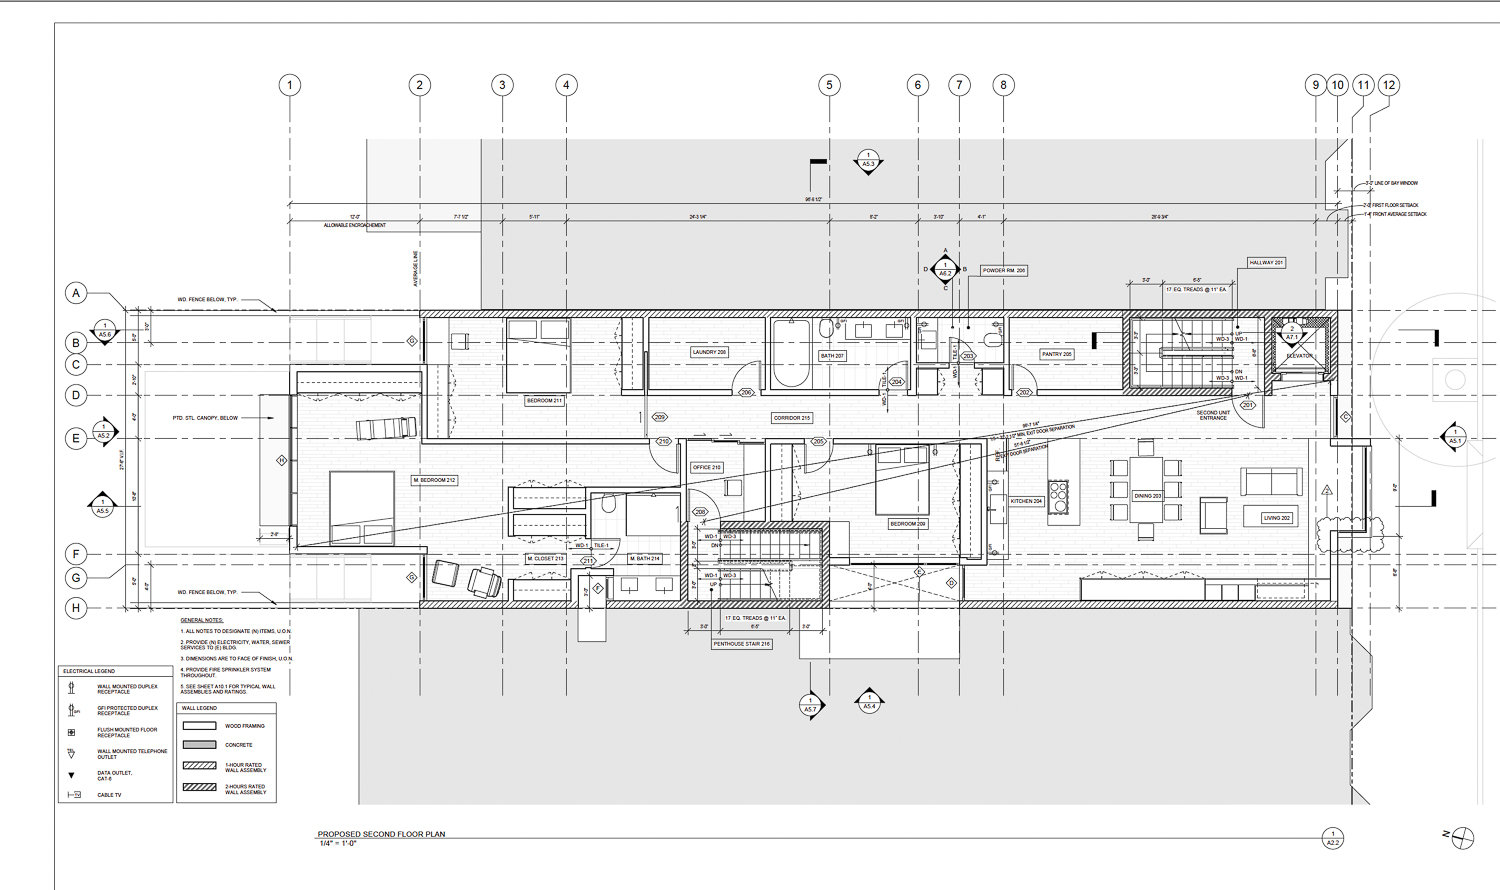 1336 Chestnut Street second level floor plan, drawing by Michael Hennessey Architecture